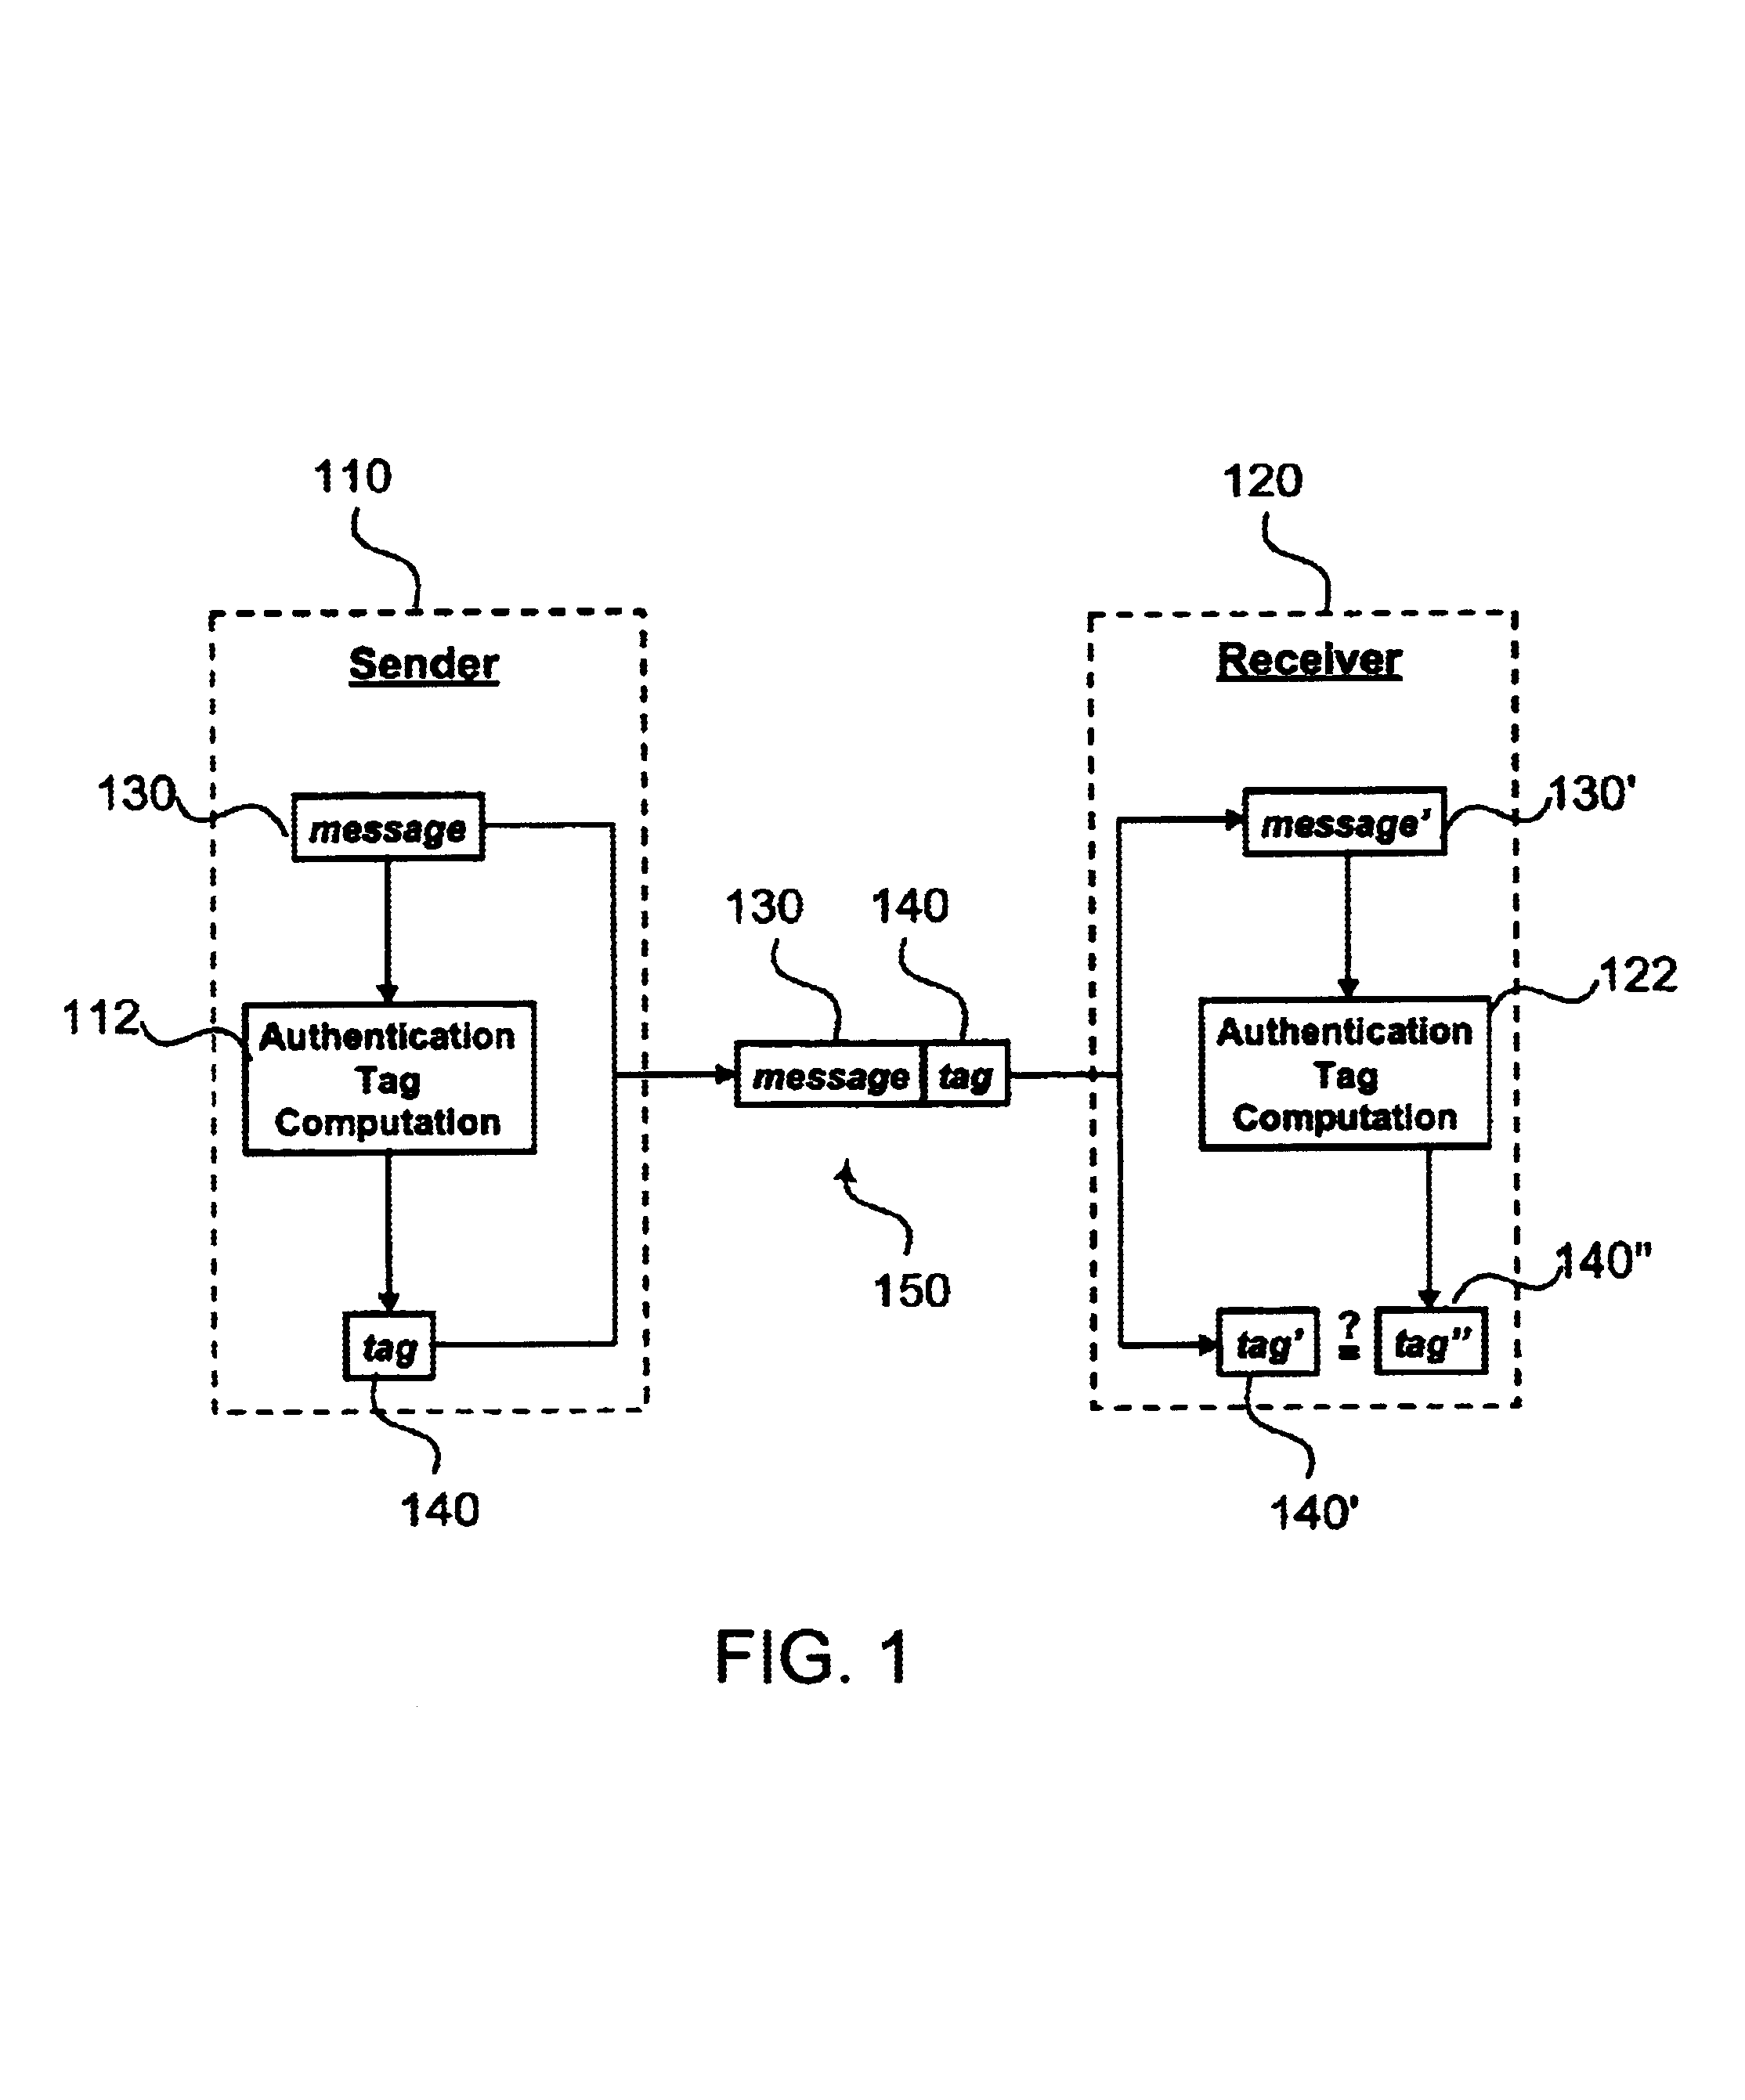 System and method for enabling authentication at different authentication strength-performance levels